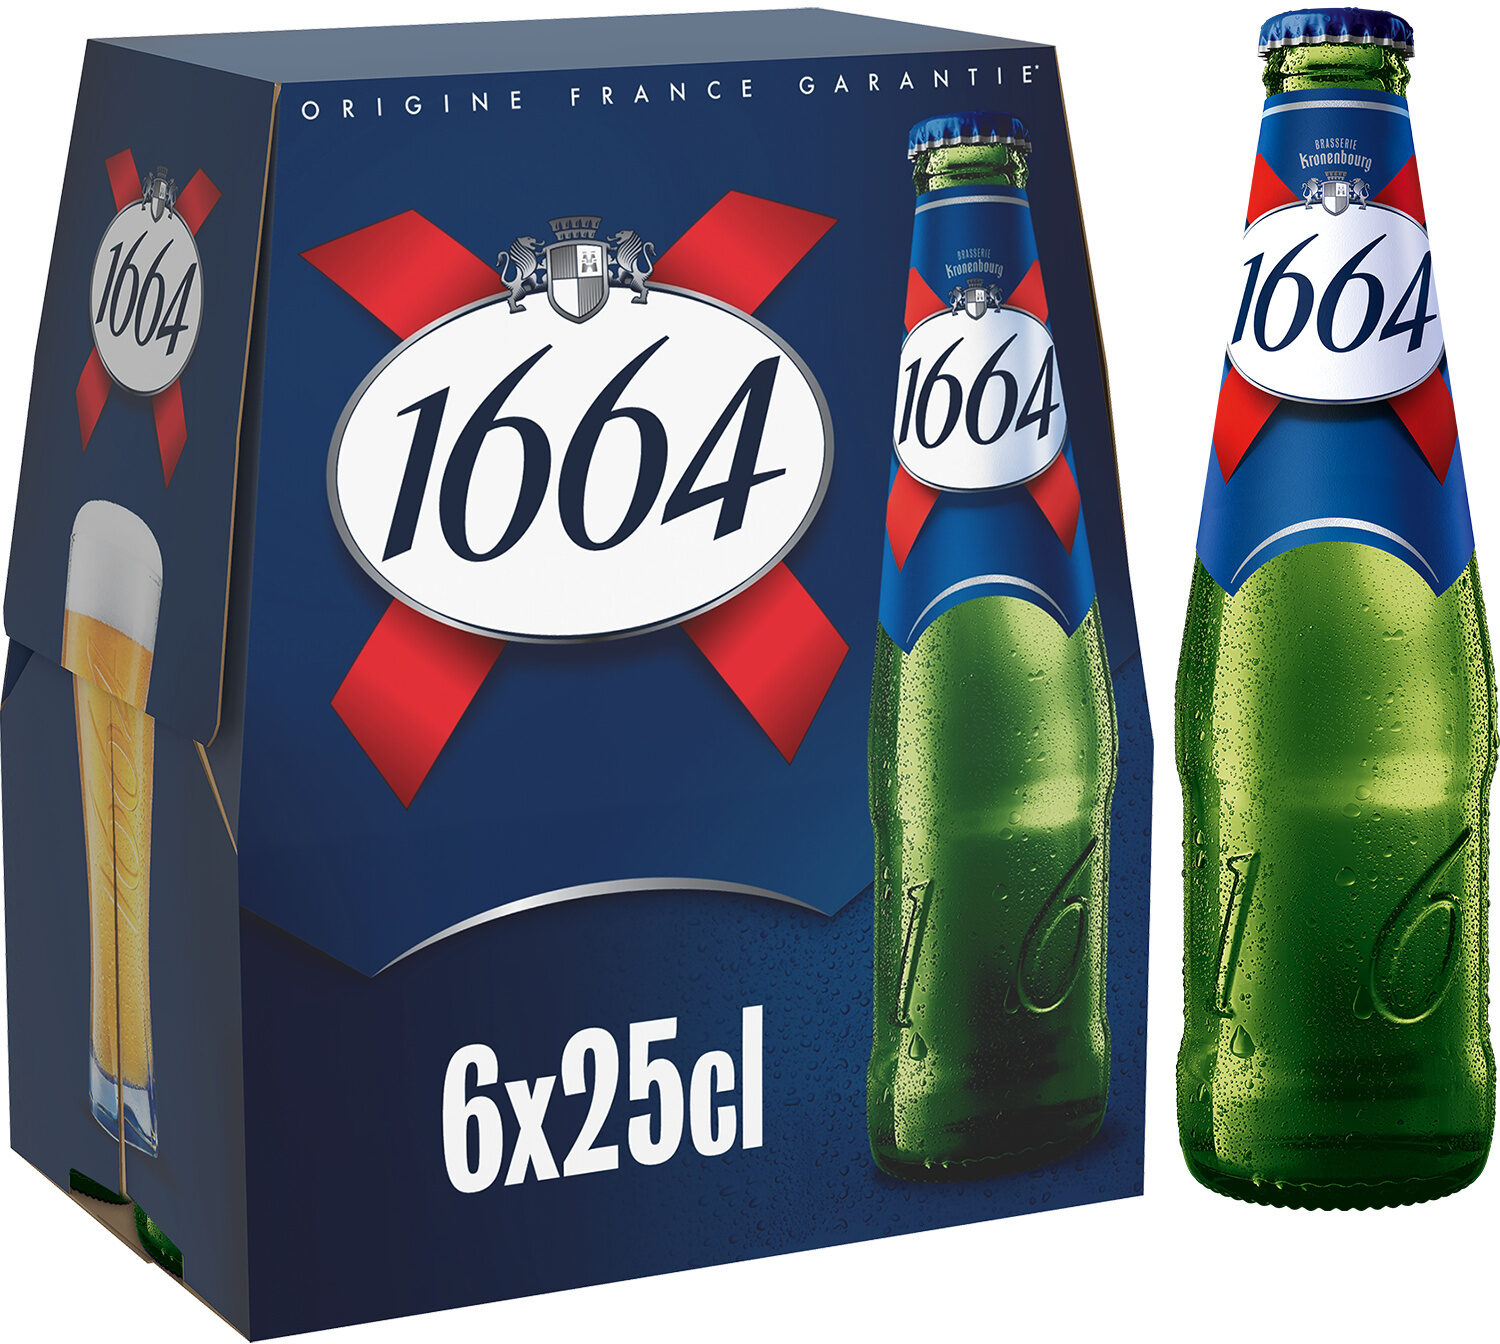 1664 6x25cl 1664 5.5 degre alcool - Product - fr